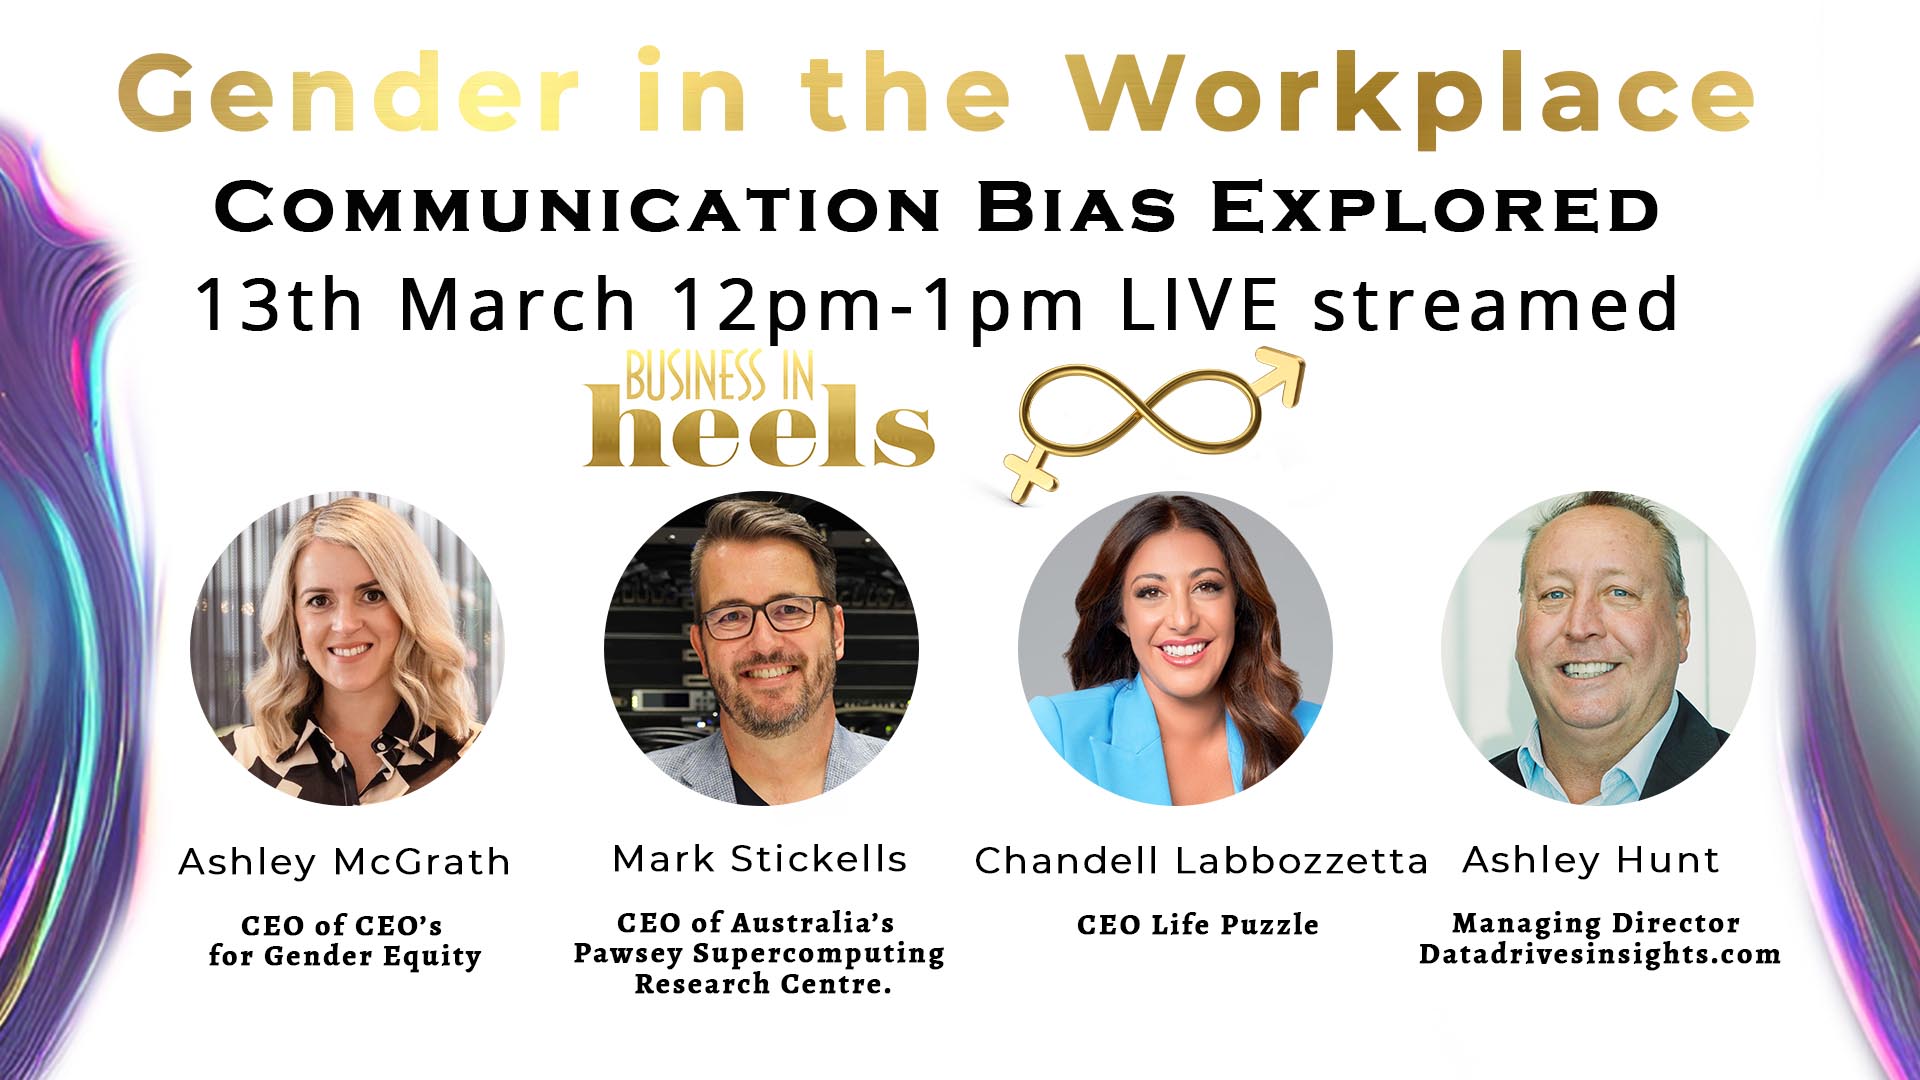 Gender in the Workplace Communication Bias